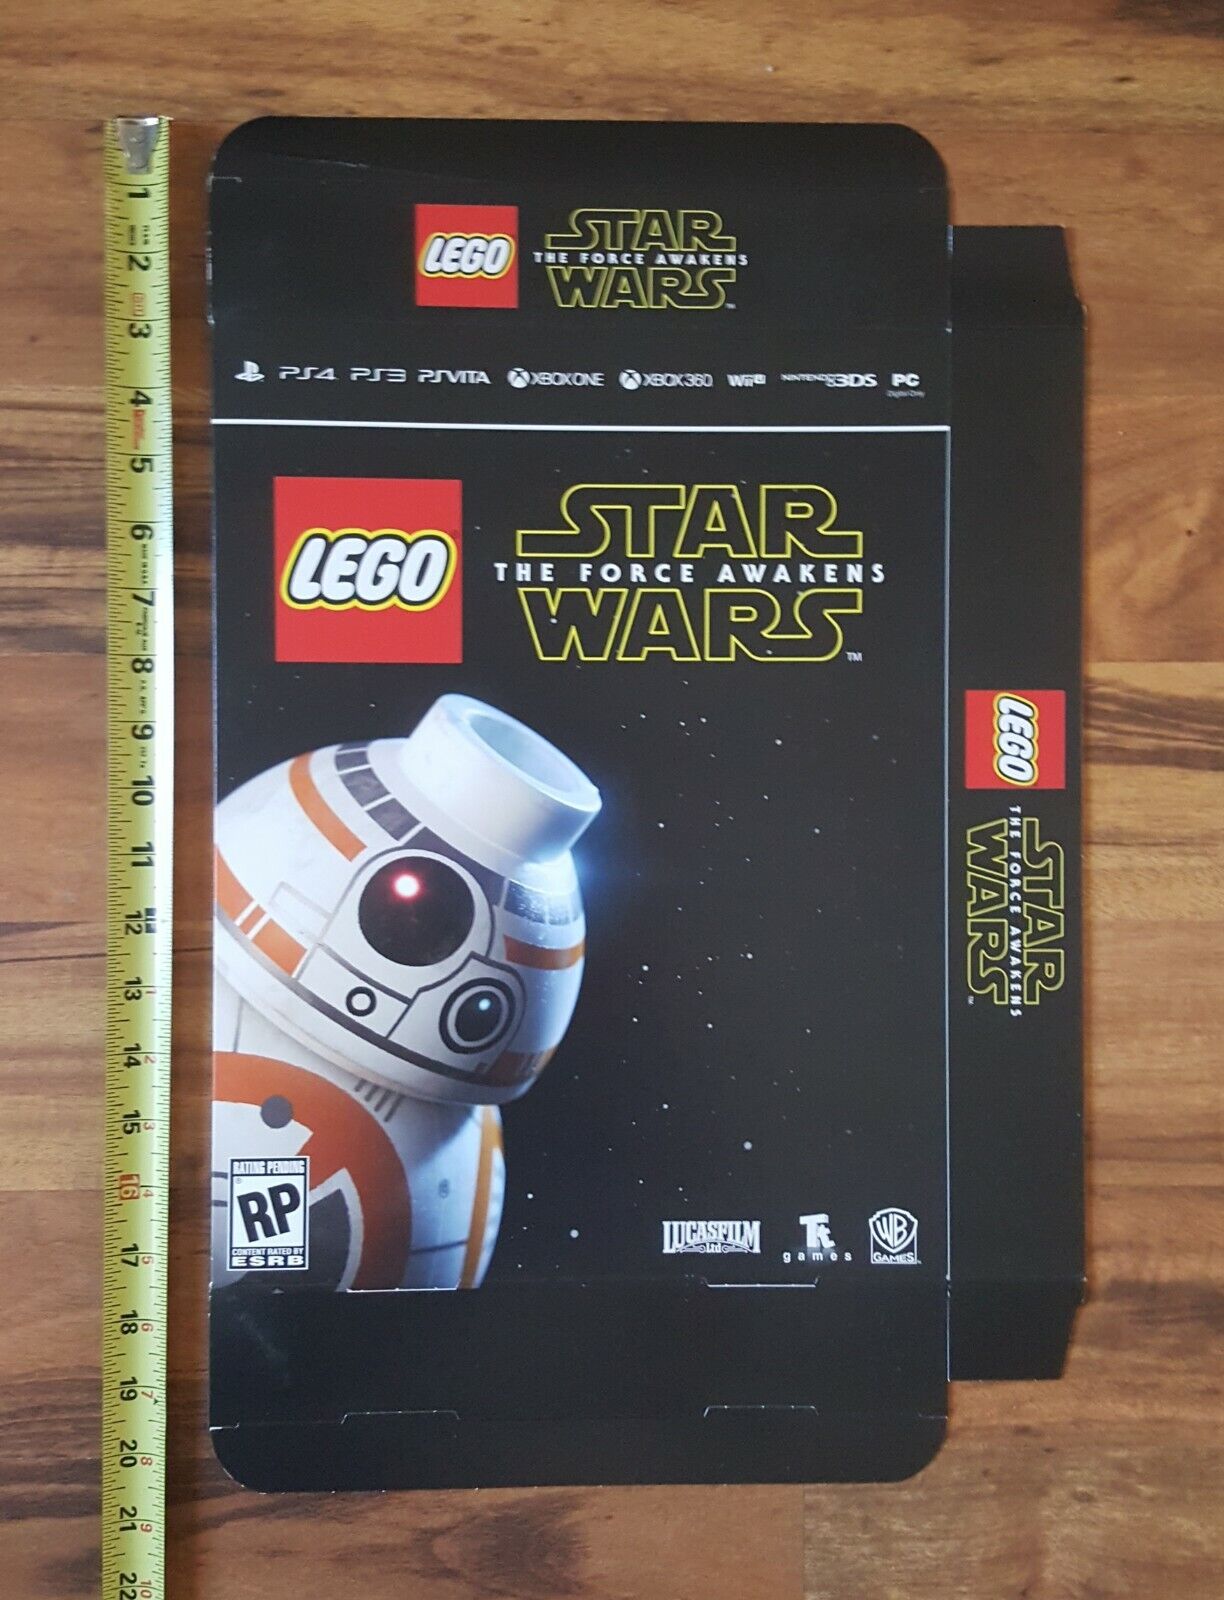 Lego Star Wars The Force Awakens Video Game Store Display Promo Box 2016 BB-8